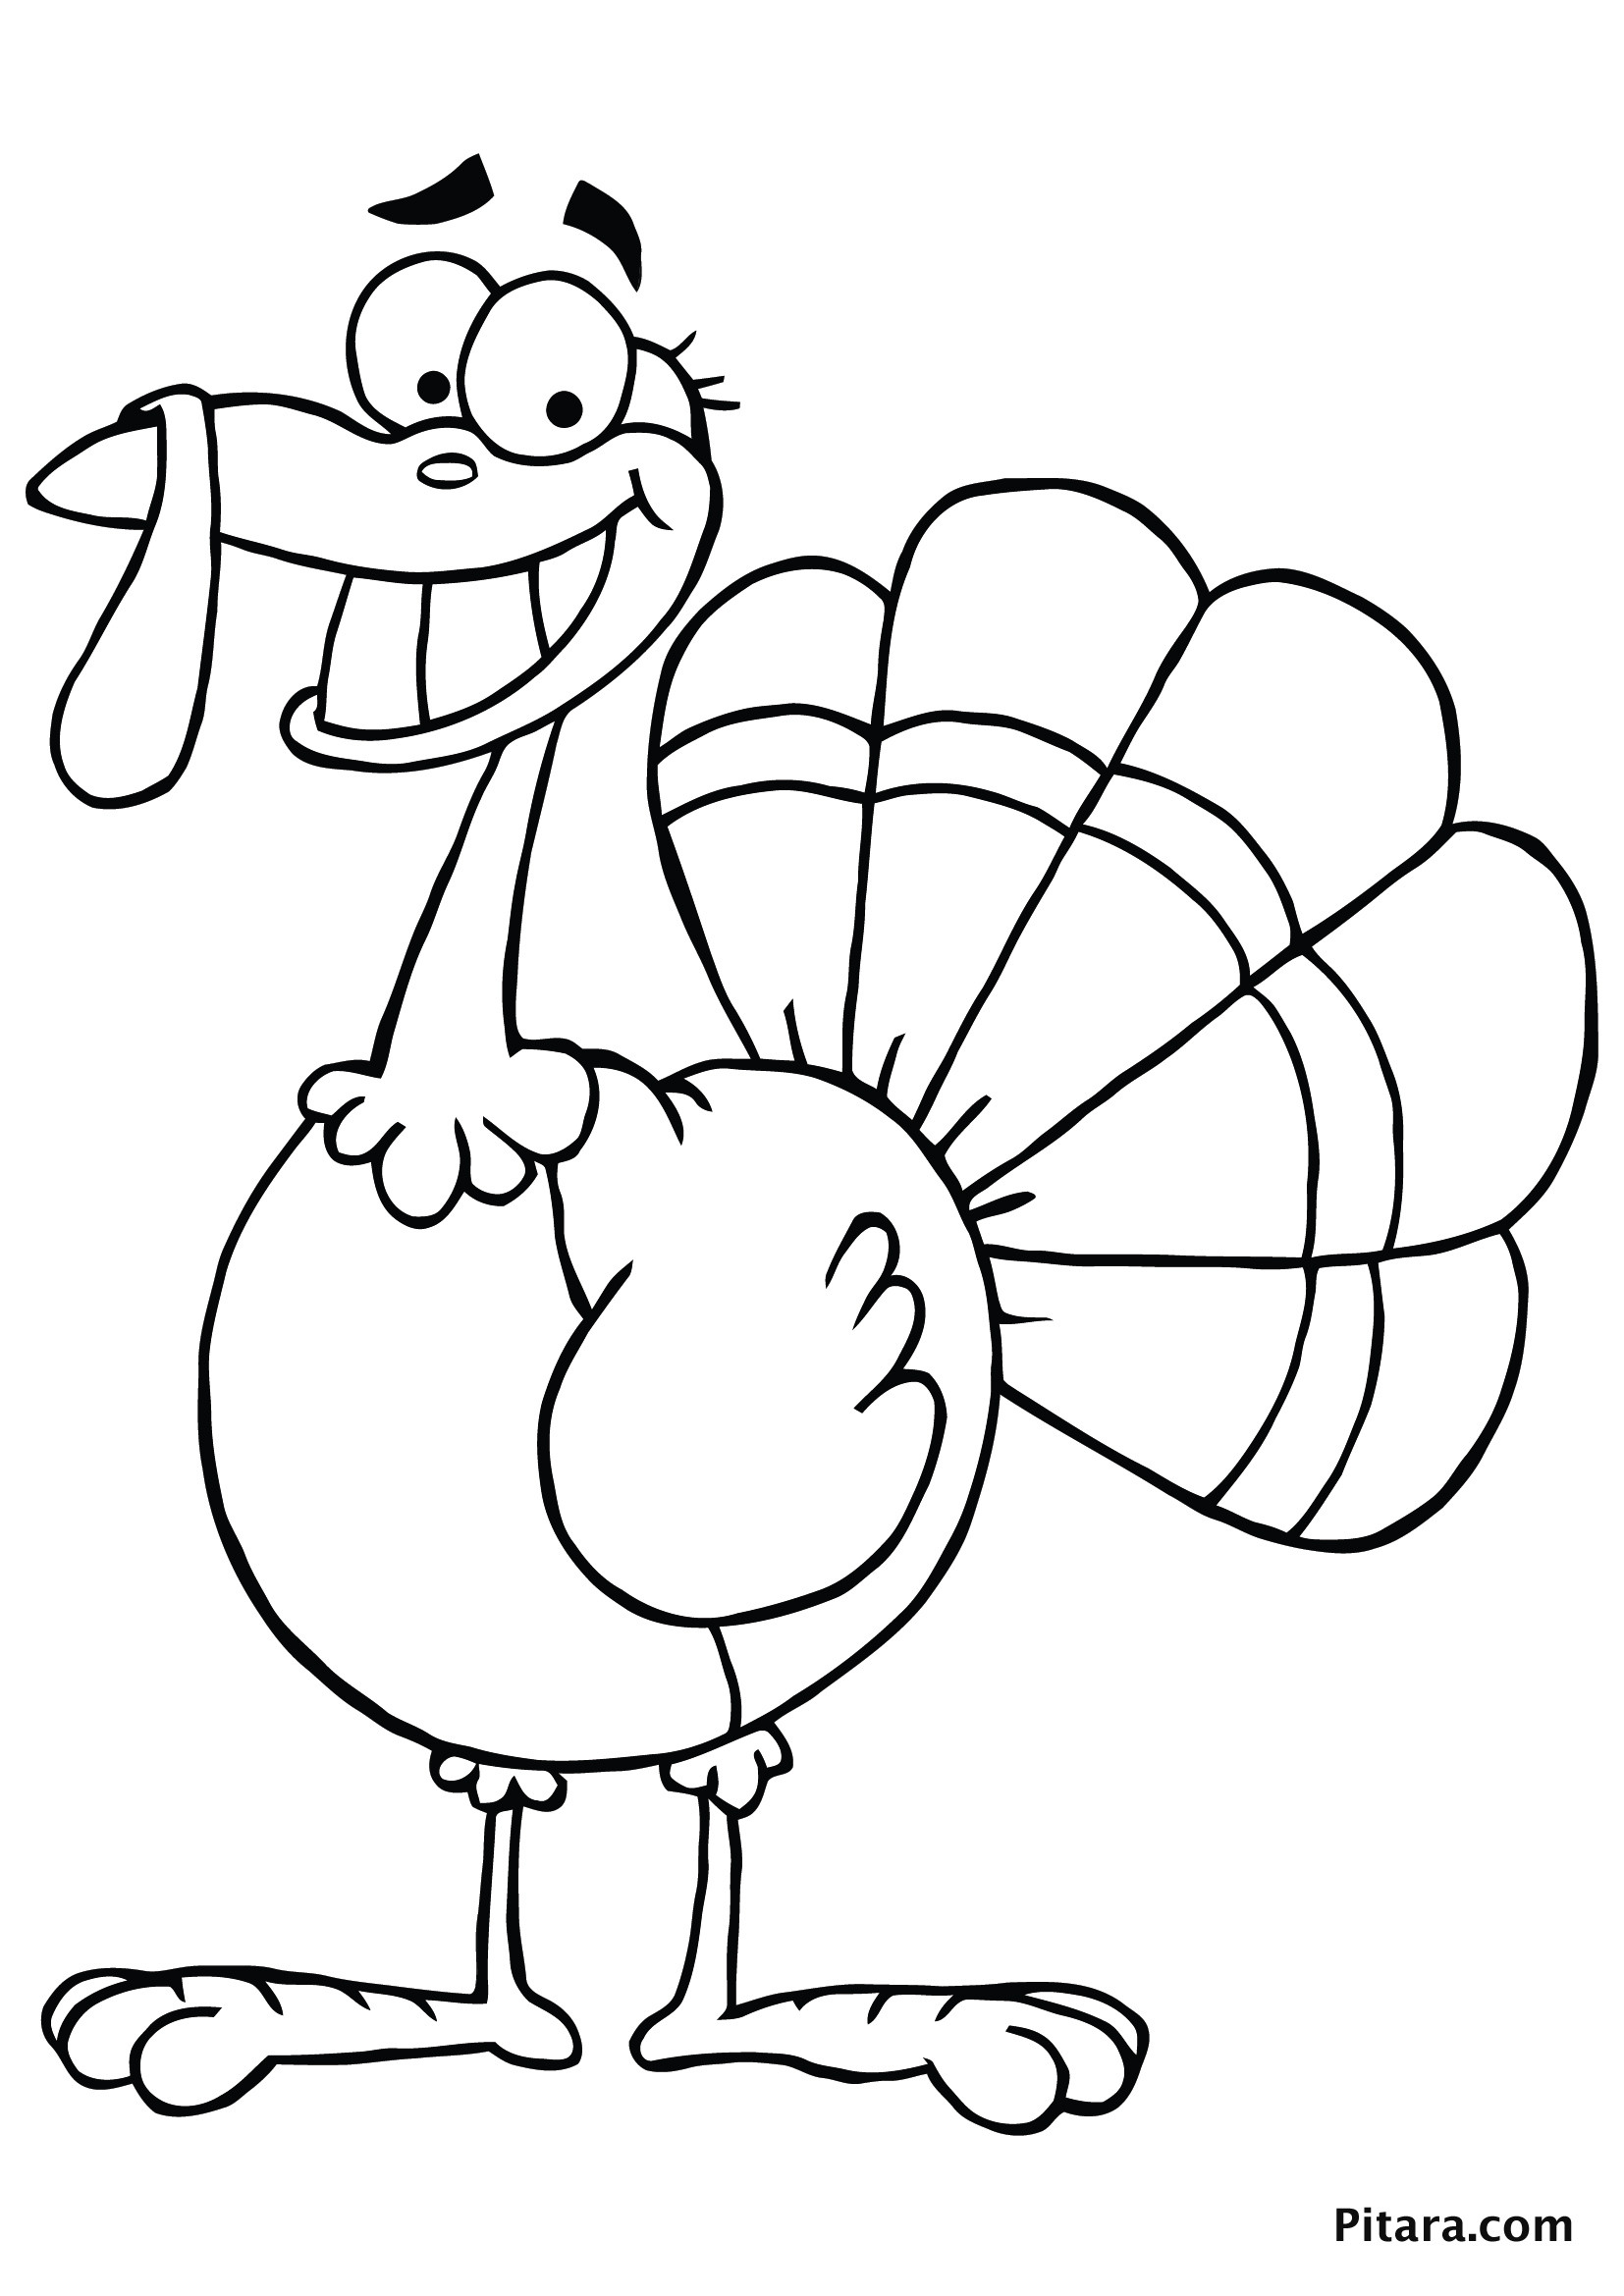 Thanksgiving Turkey Coloring Page
 Turkey Coloring Pages for Kids